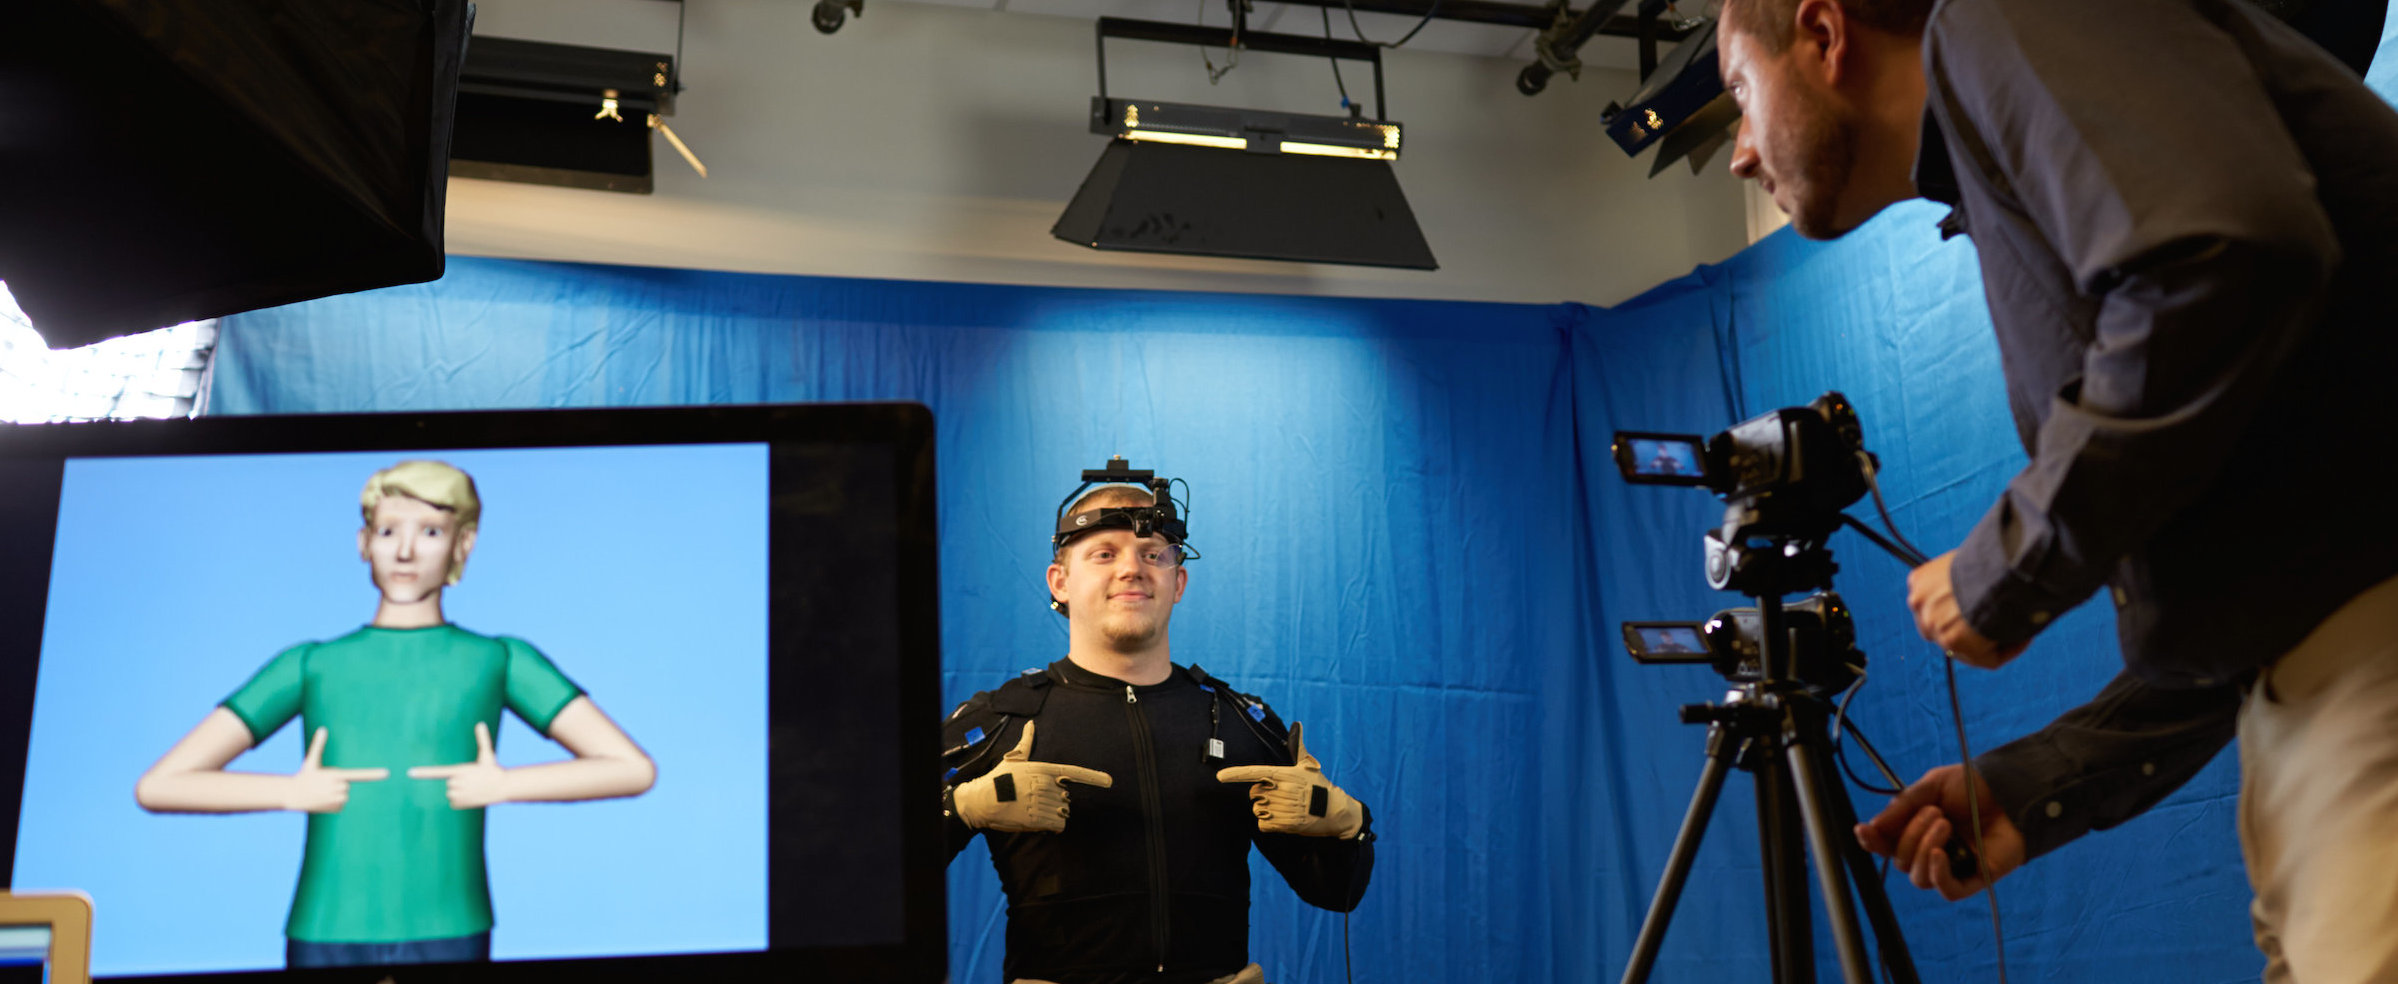 Motion-capture equipment recording in the laboratory.